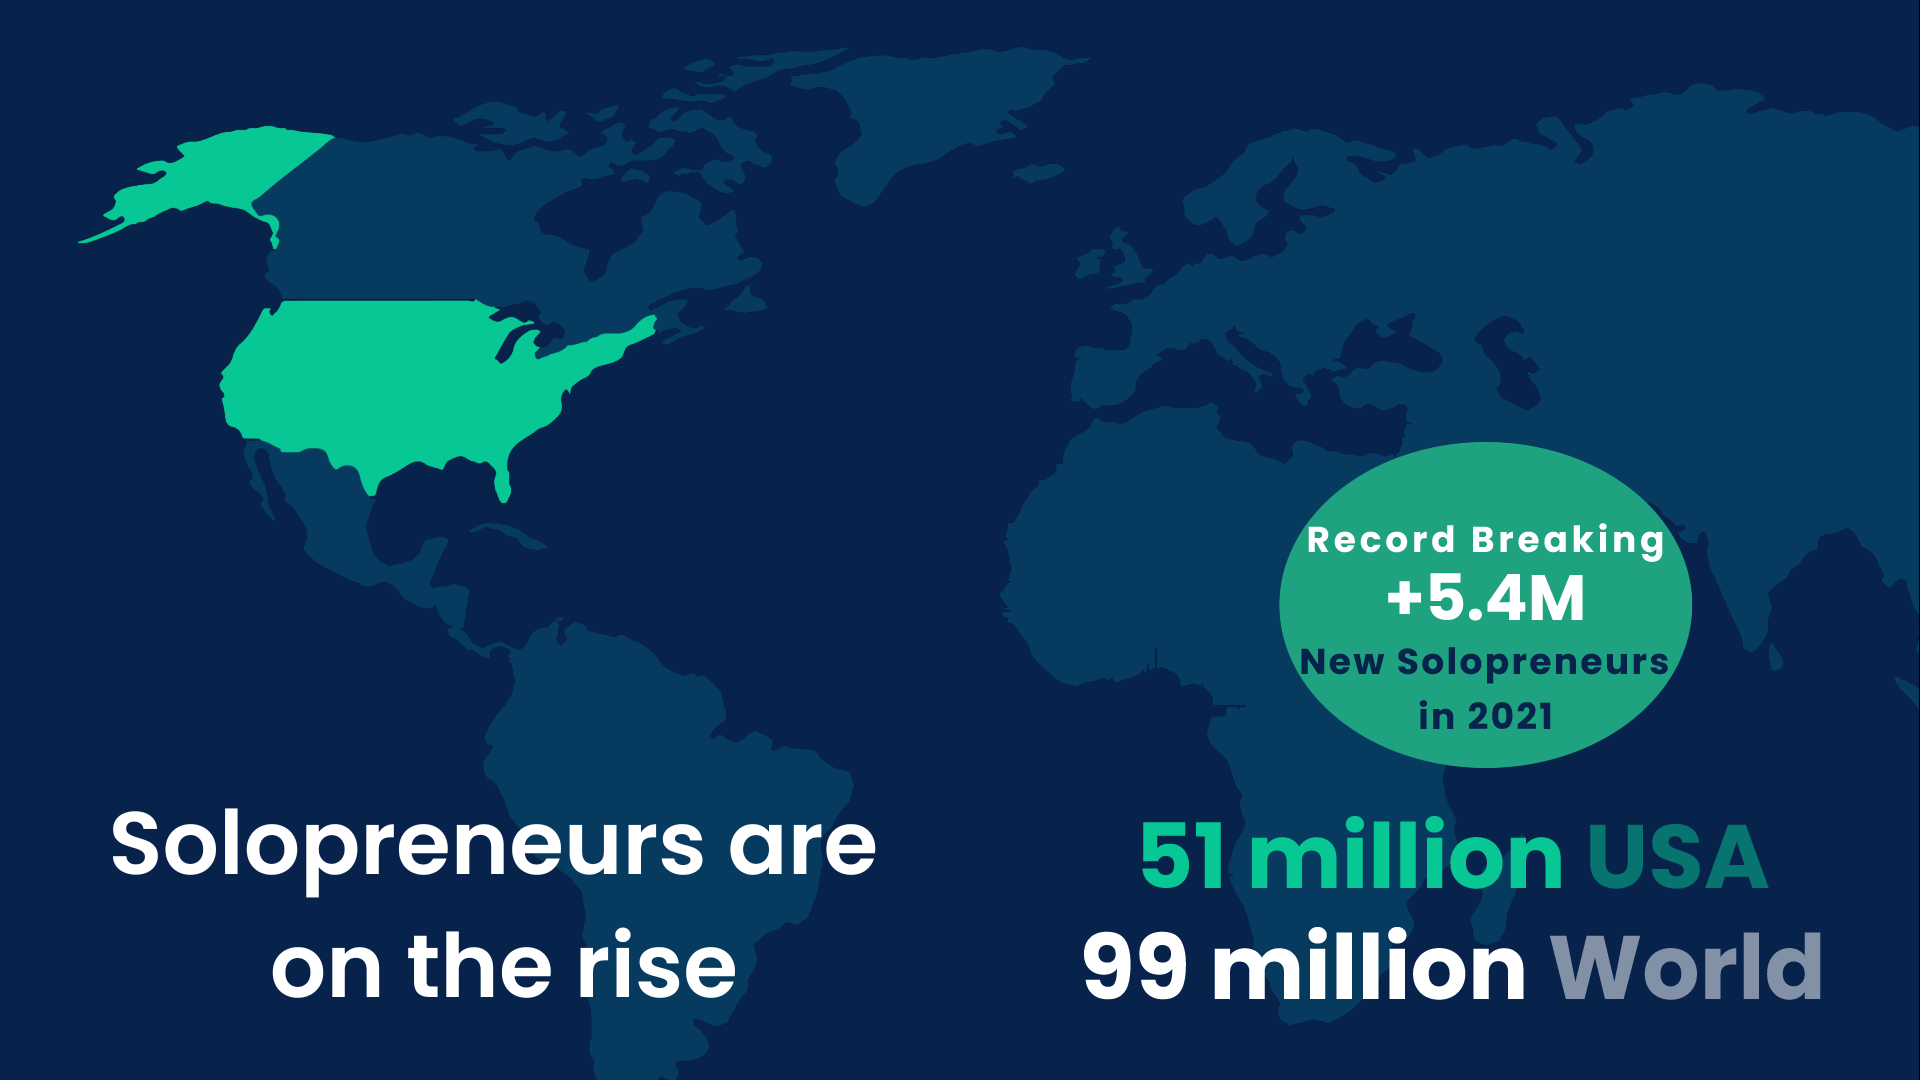 Solopreneurs are on the rise